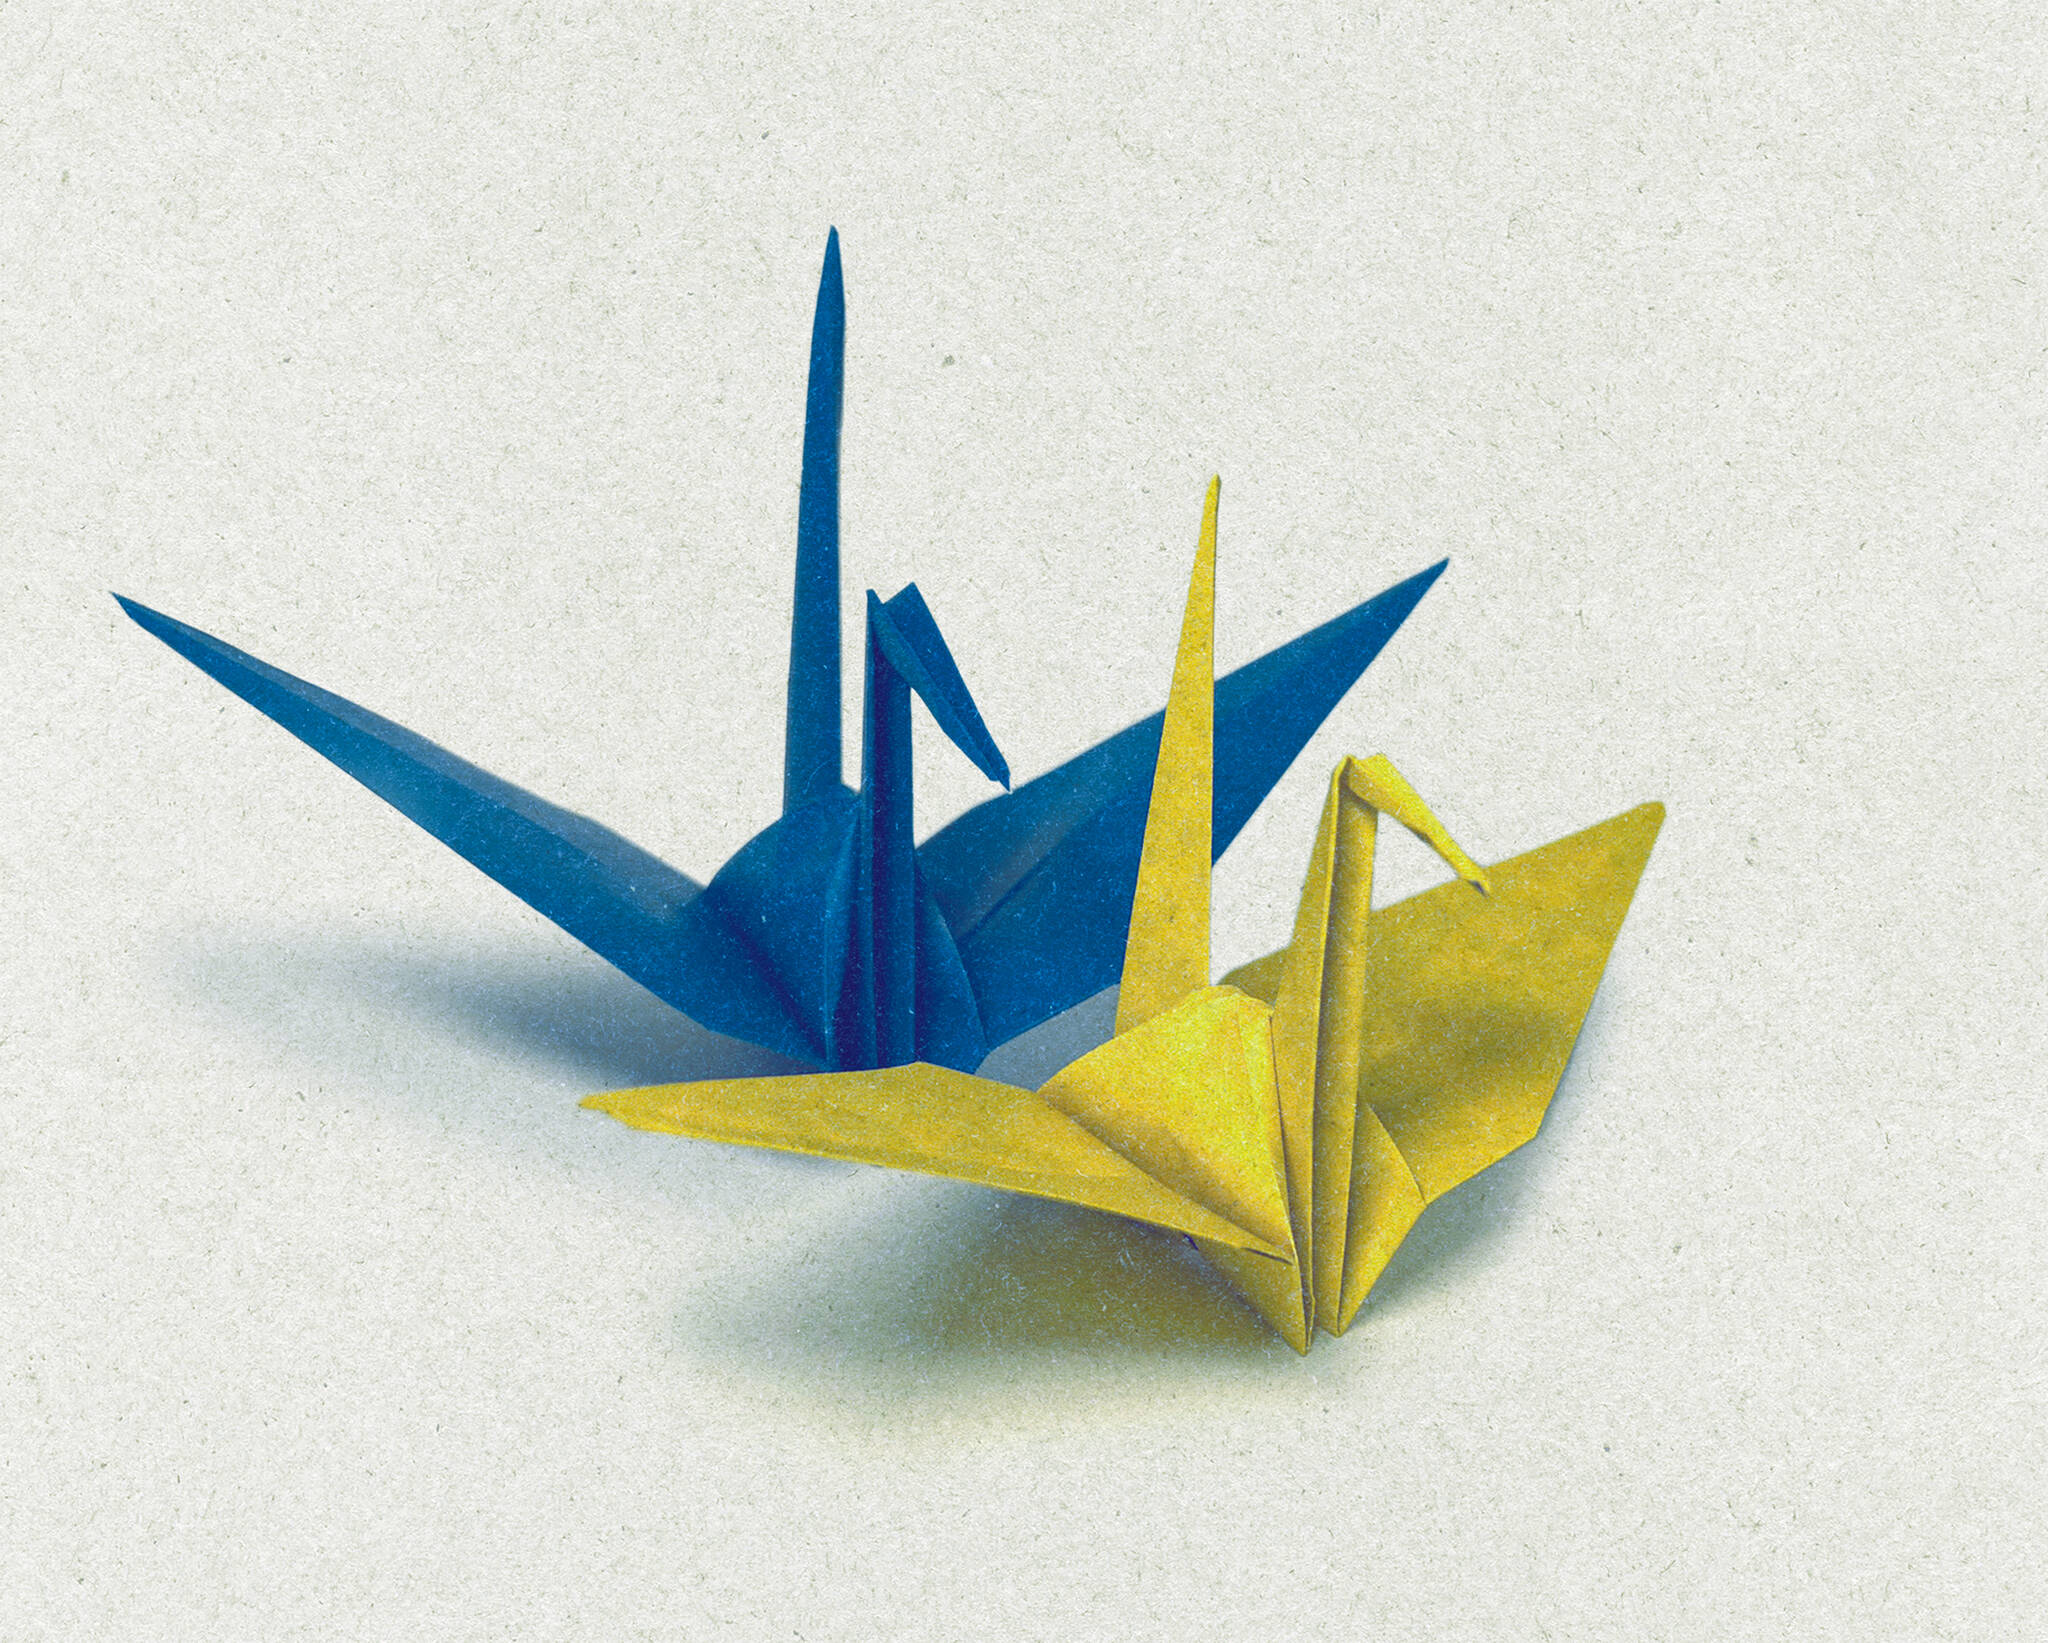 Photo provided by the Kenai Art Center
Origami cranes are folded to symbolize peace in Ukraine.